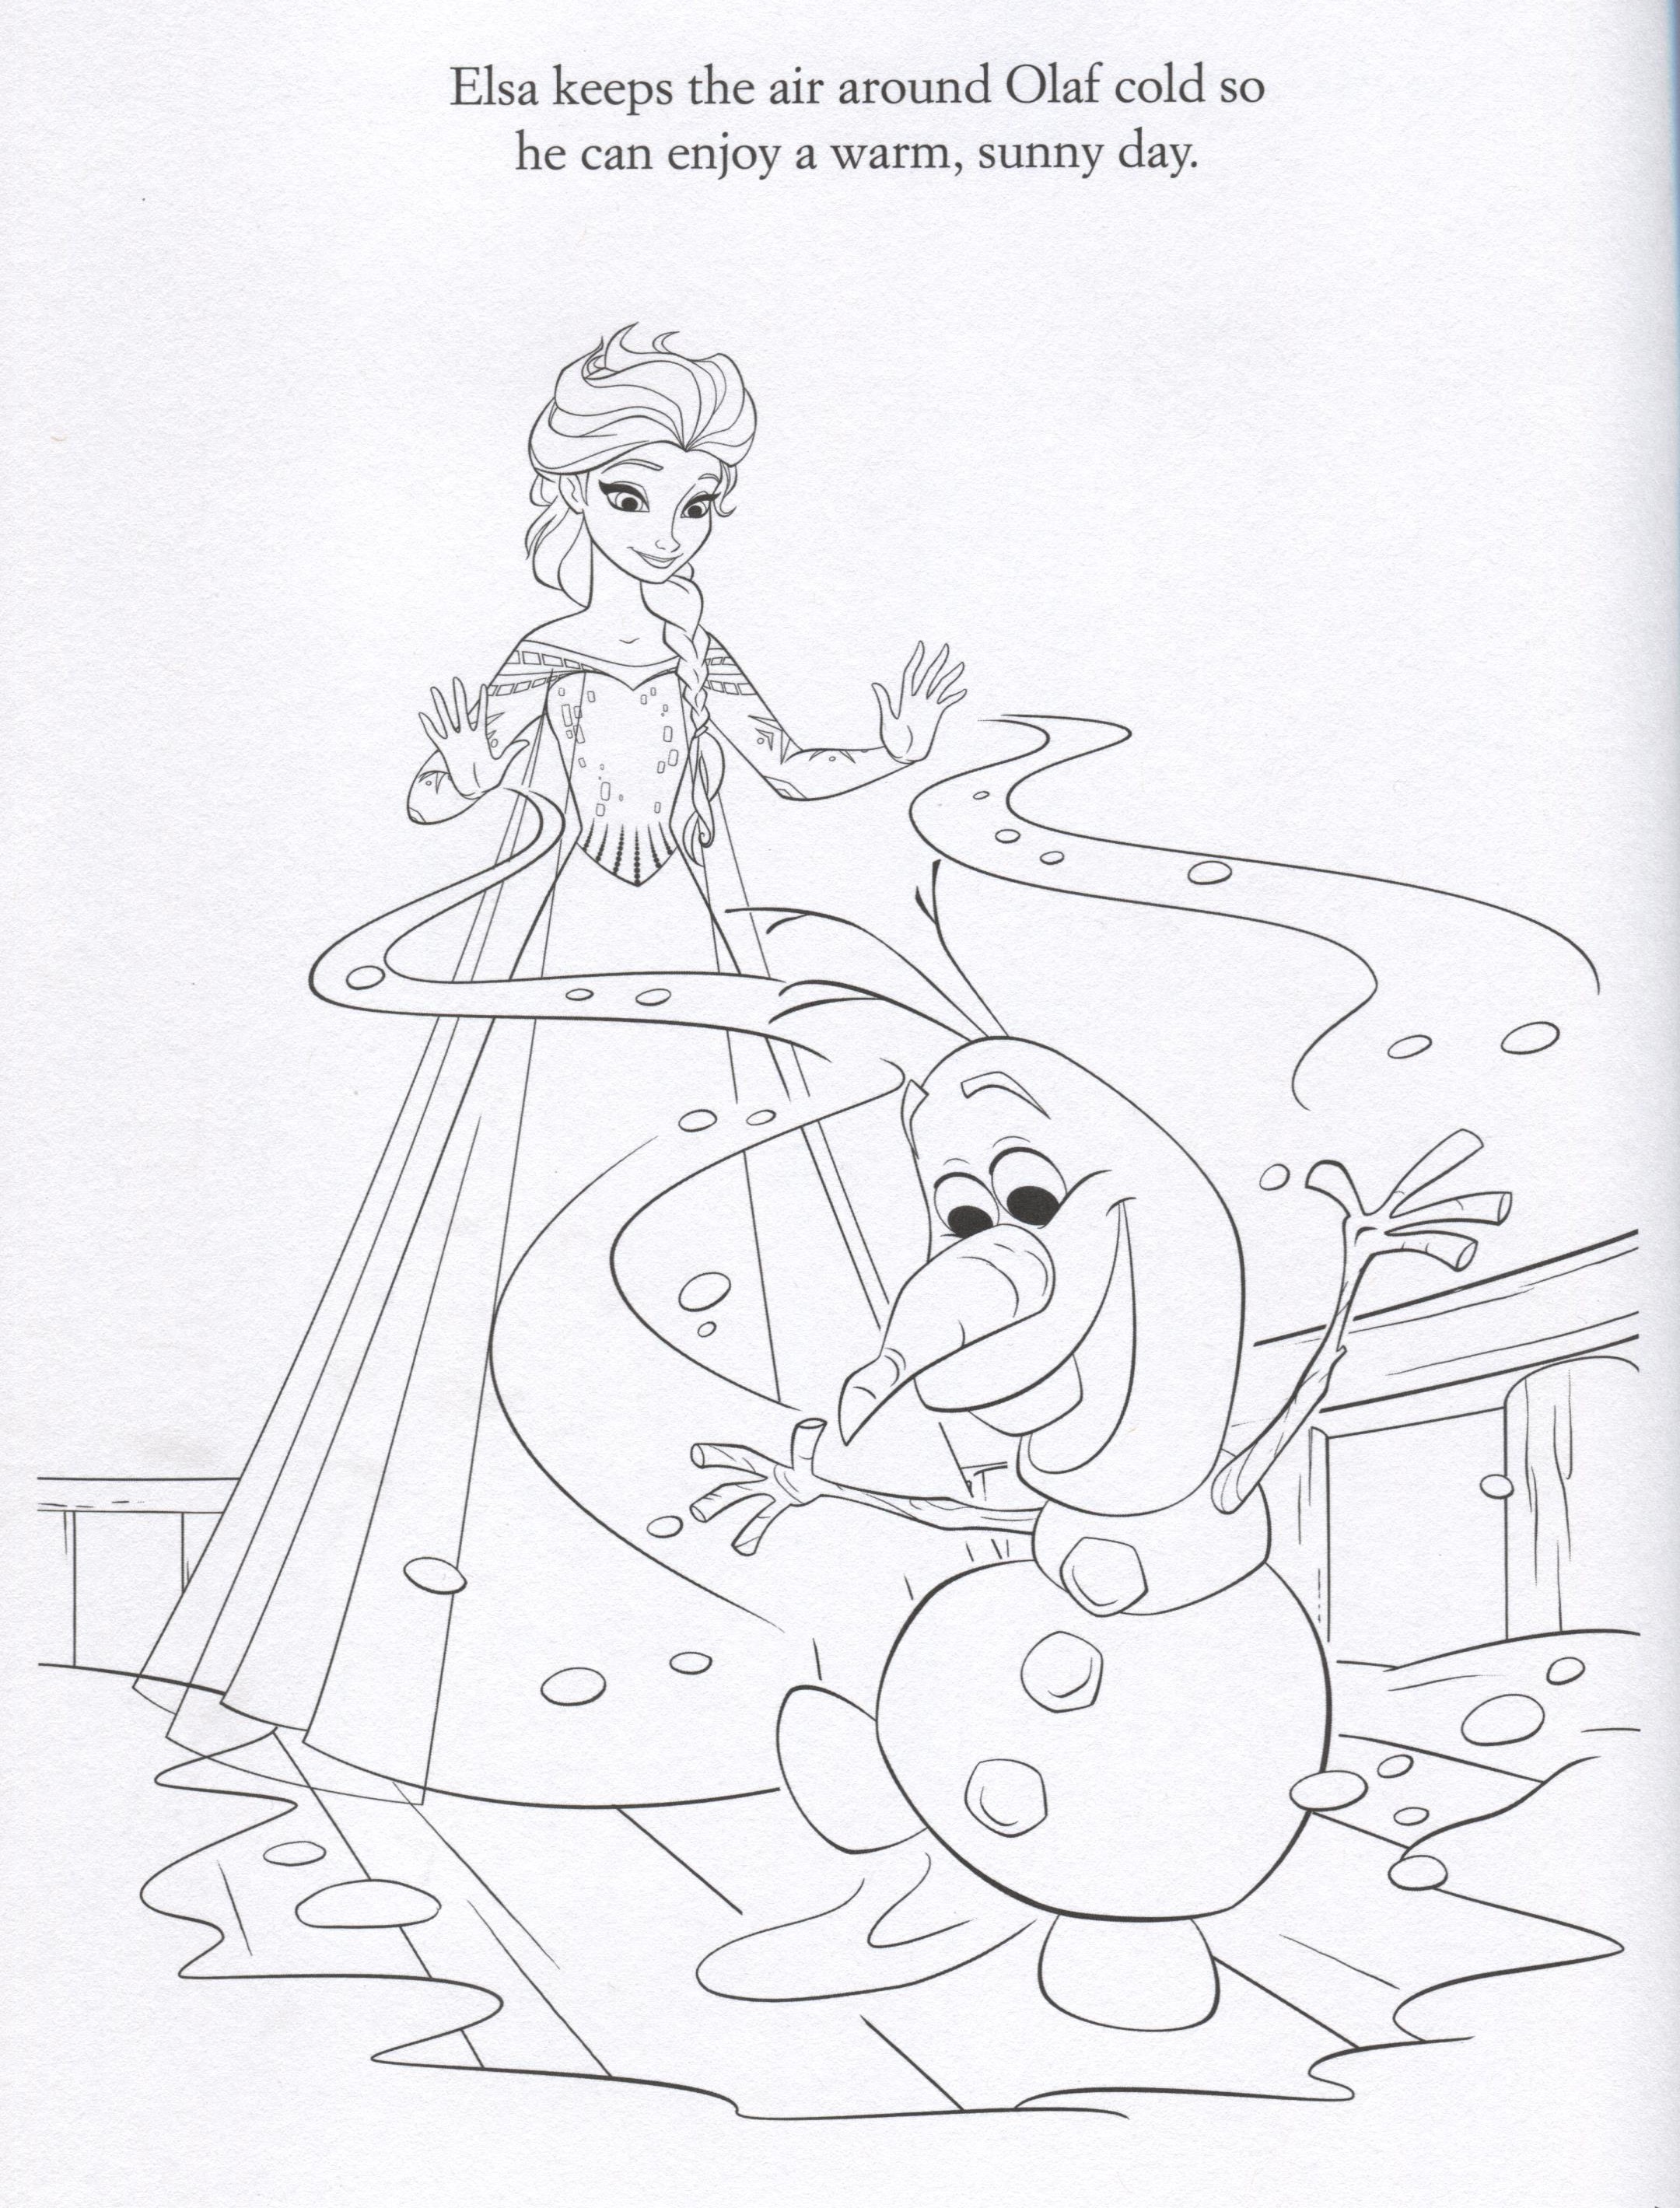 FROZEN Elsa & Olaf Coloring Page - Lovebugs and Postcards